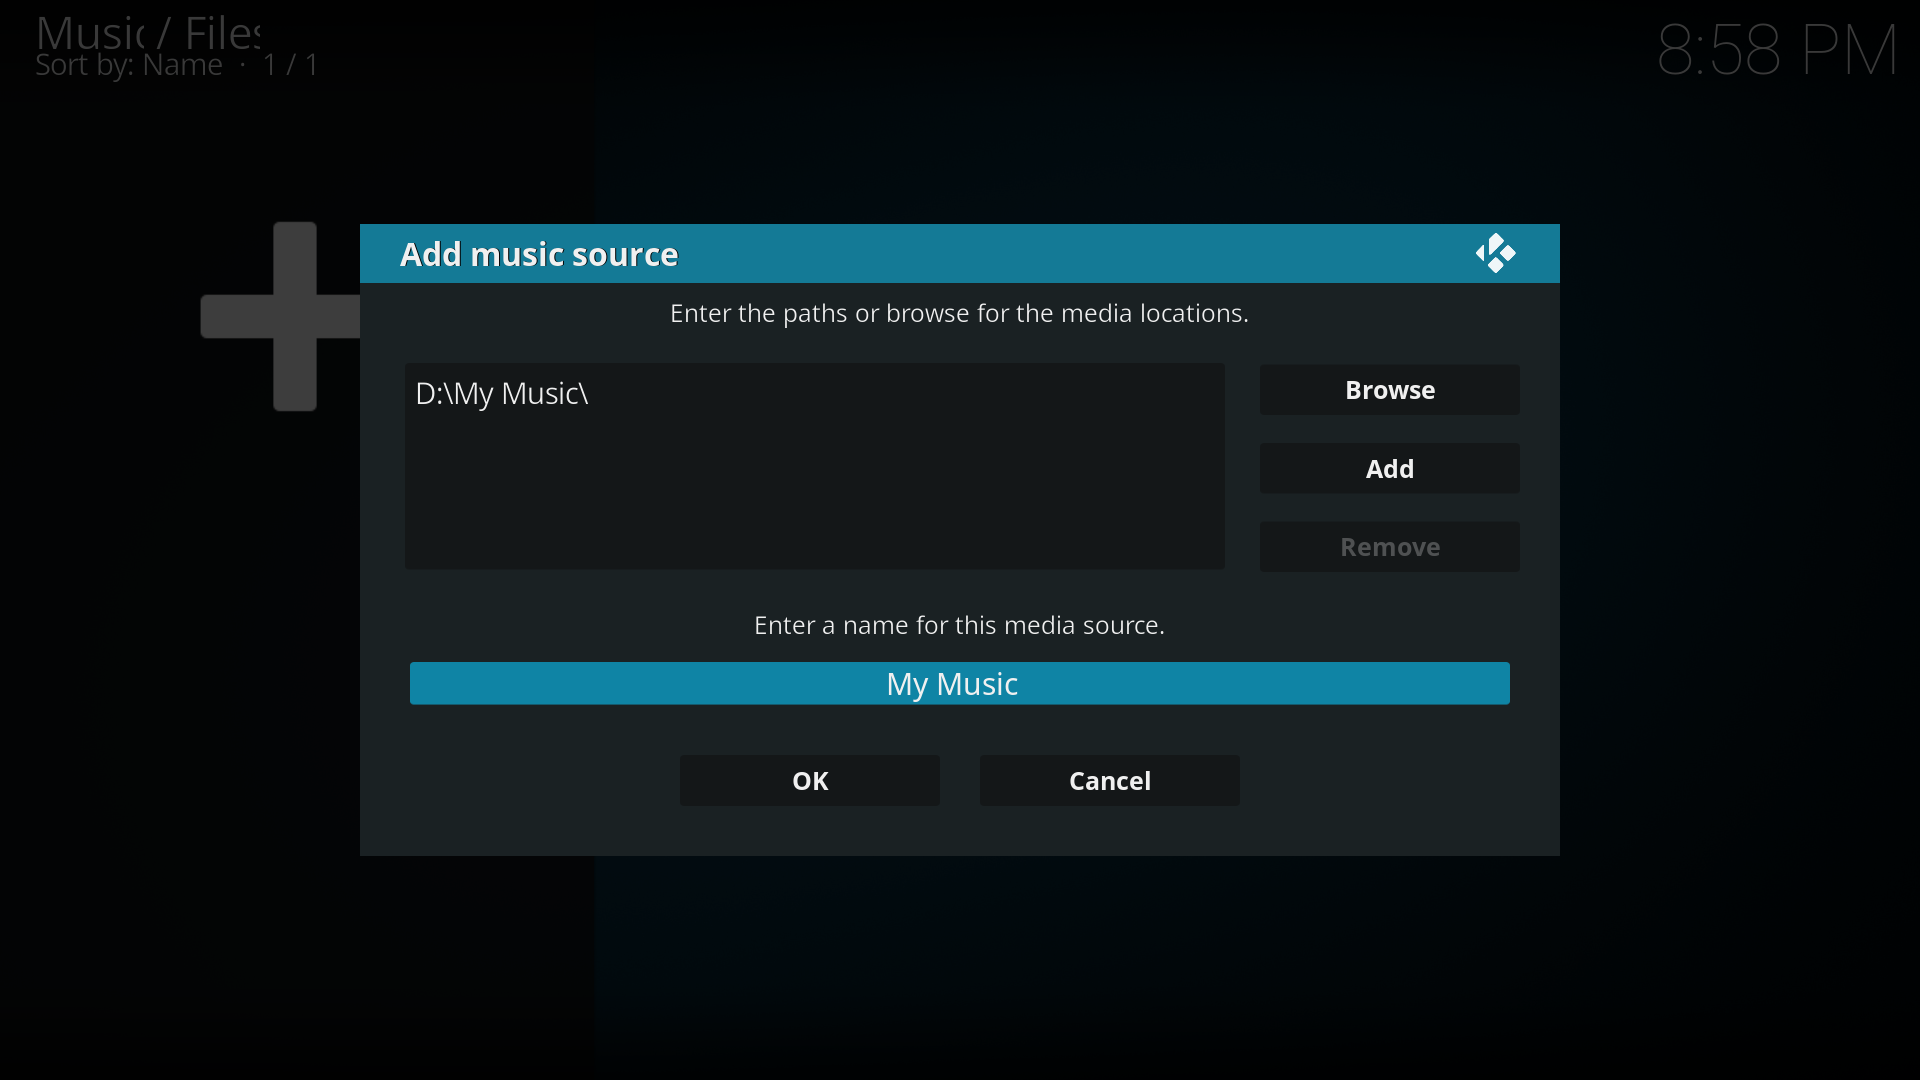 Step 5: You will now be taken back to the Add music source window. Under Enter a name for this media source you can optionally name your media source to replace the suggested name. Select OK